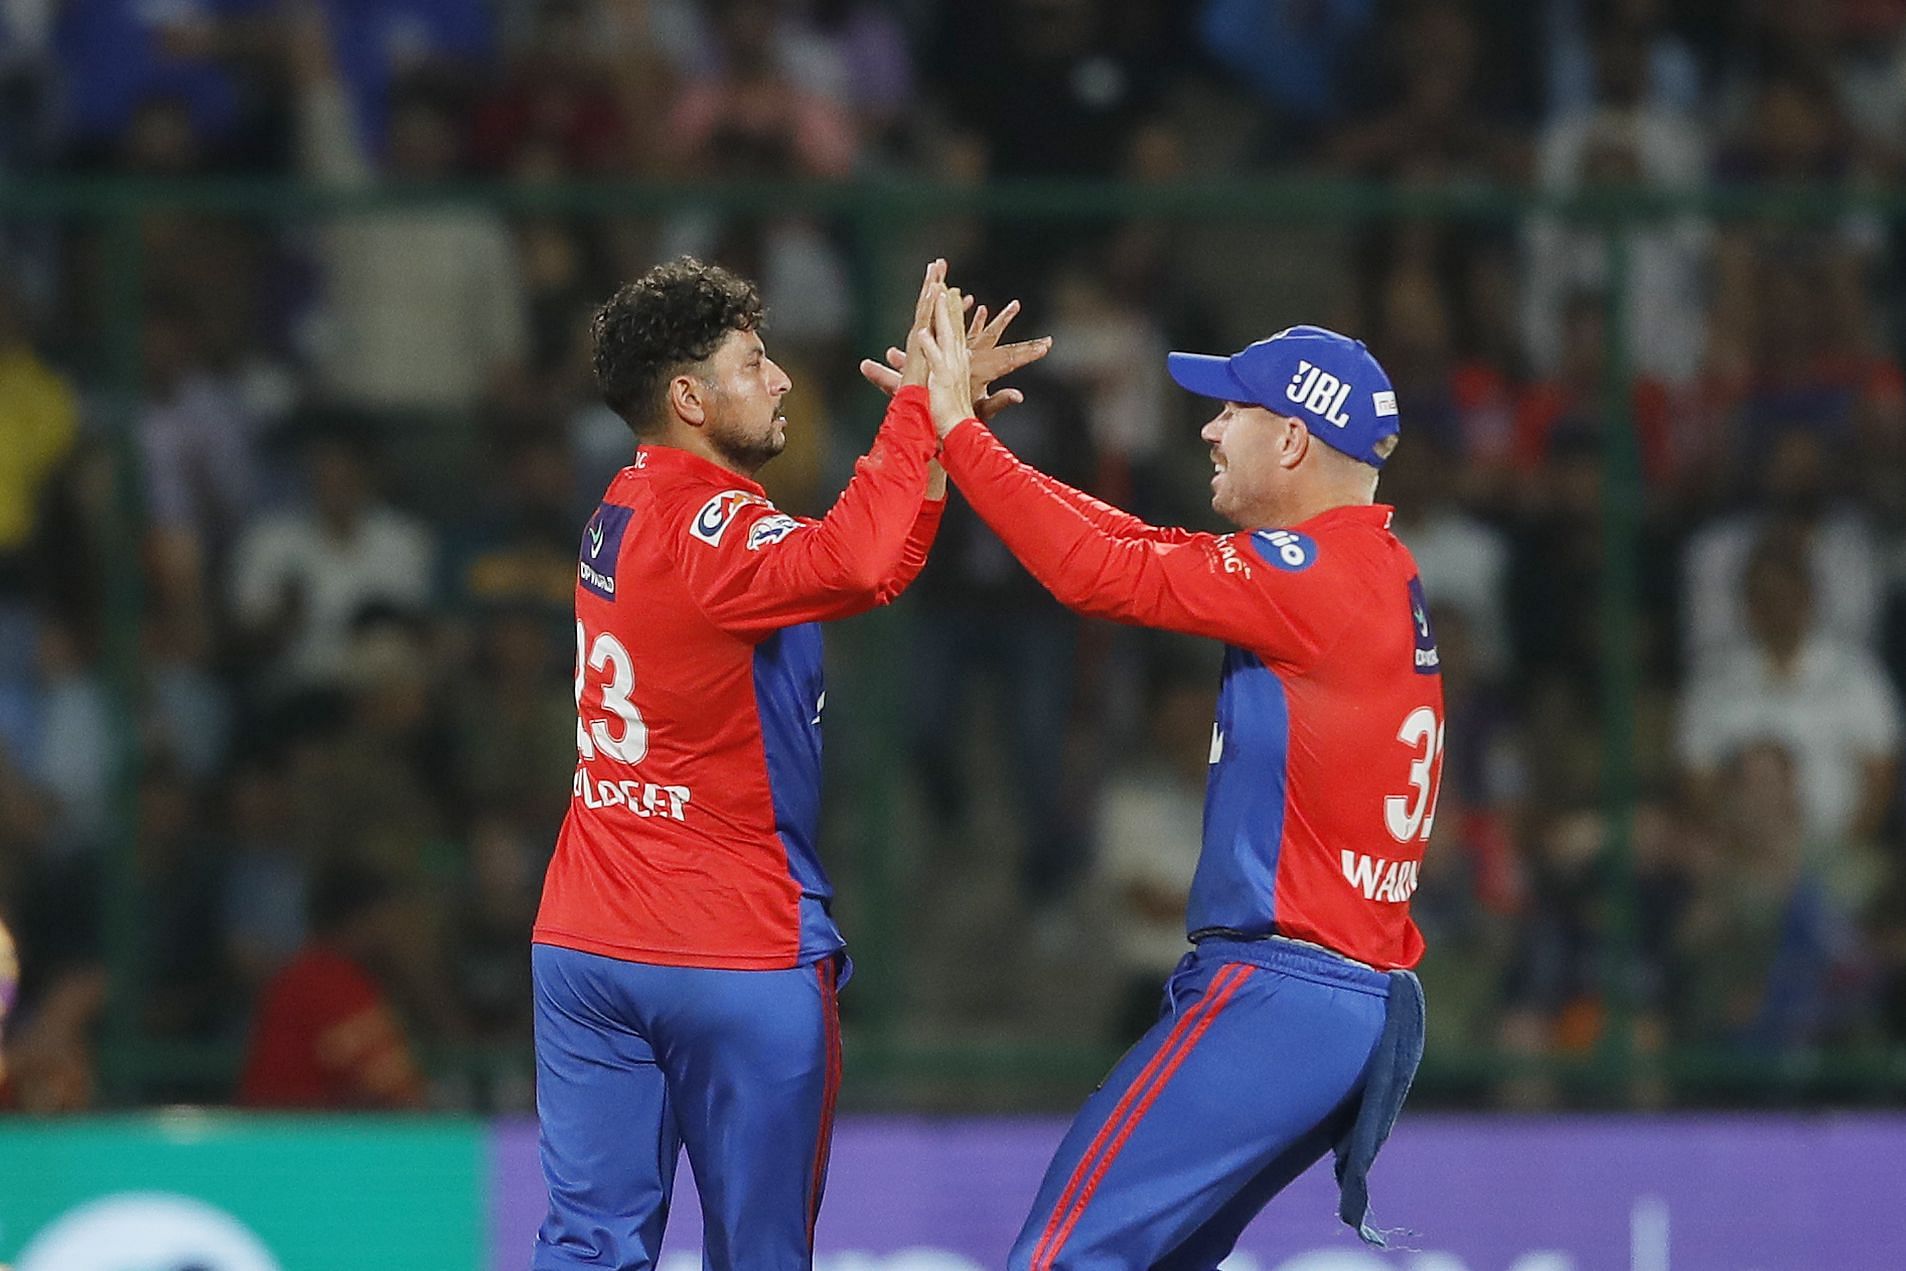 Delhi Capitals grabbed their first win in their last game (Image Courtesy: Twitter/IPL)